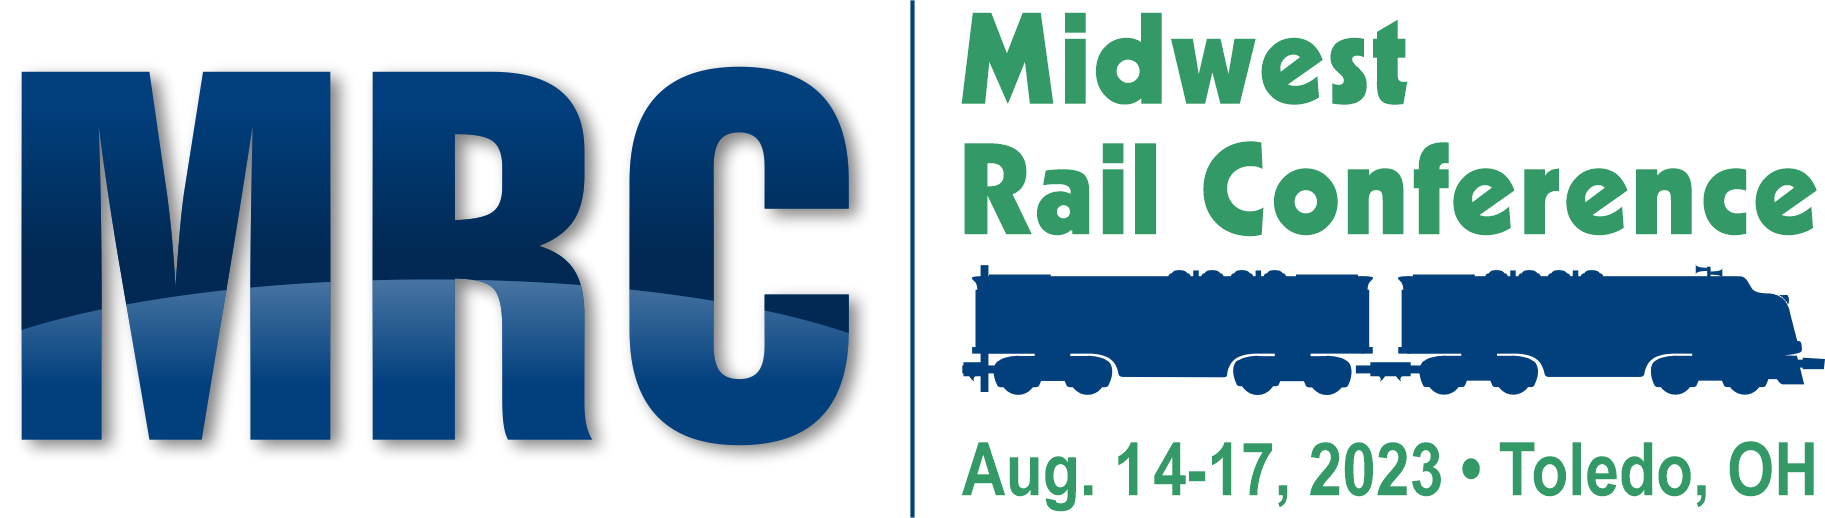 Midwest Rail Conference Logo